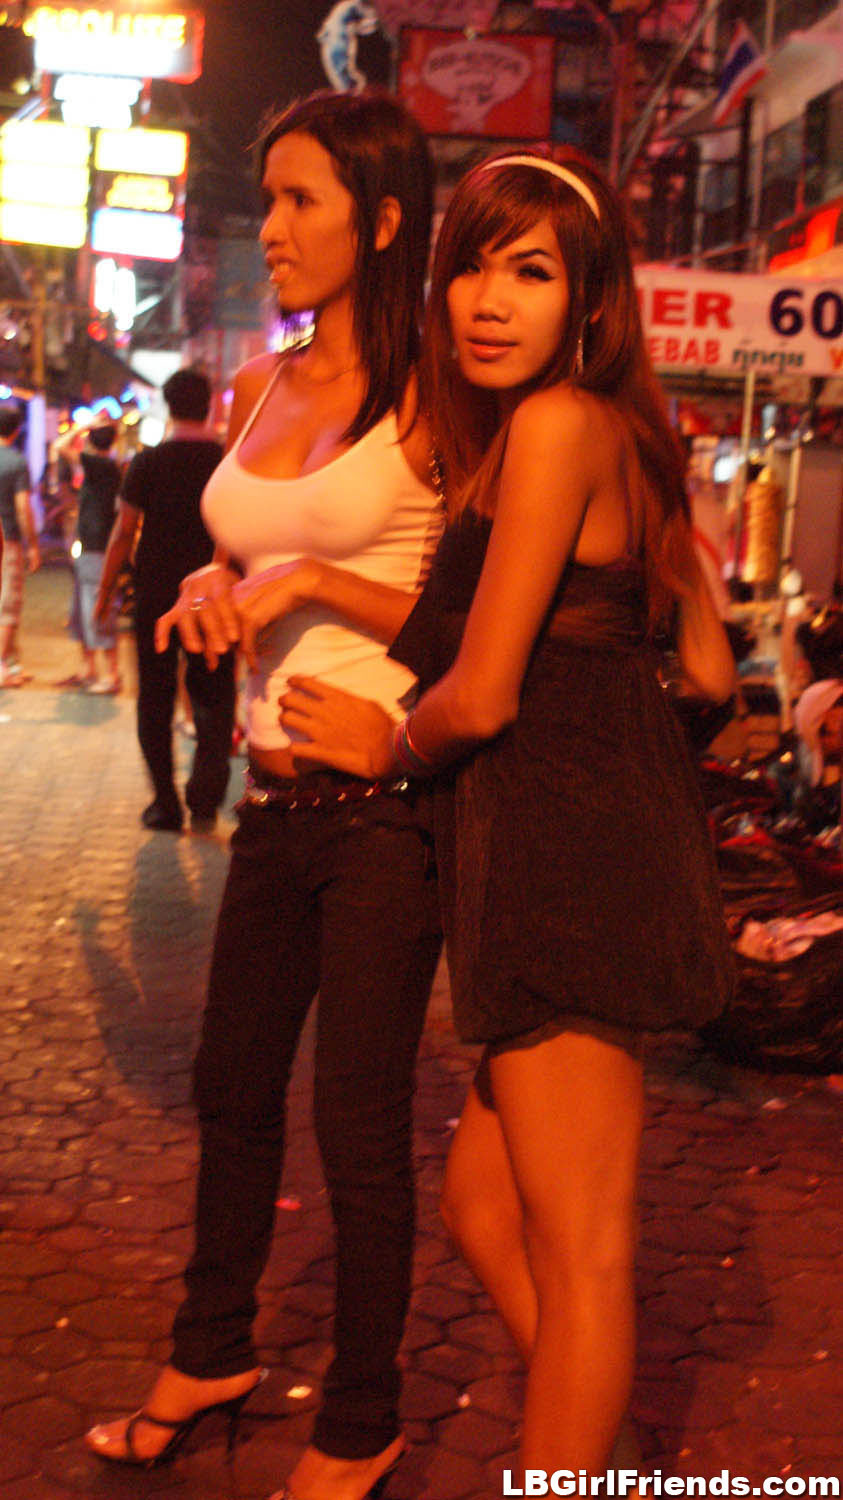 Thai Ladyboy In Public - Real Bangkok Shemale Girlfriends Public Exposure Porn Pictures, XXX Photos,  Sex Images #3358972 - PICTOA